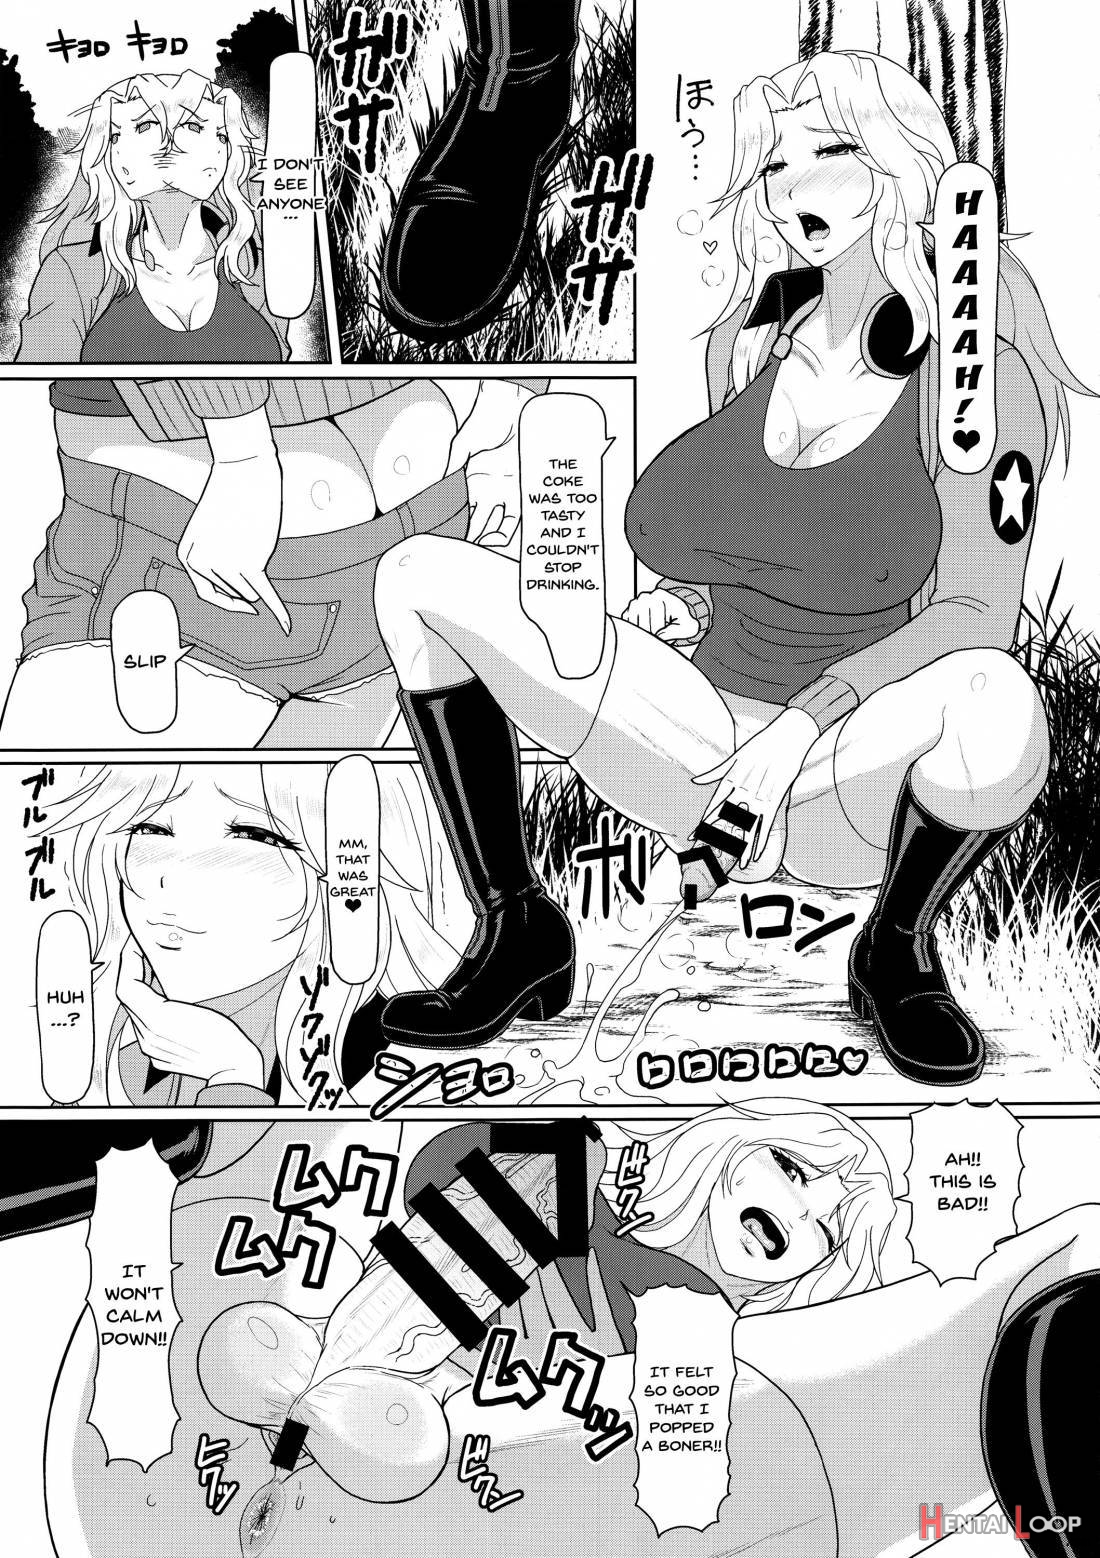 ICE BOXXX 22 “TANK GIRLS NEVER DIE” page 22